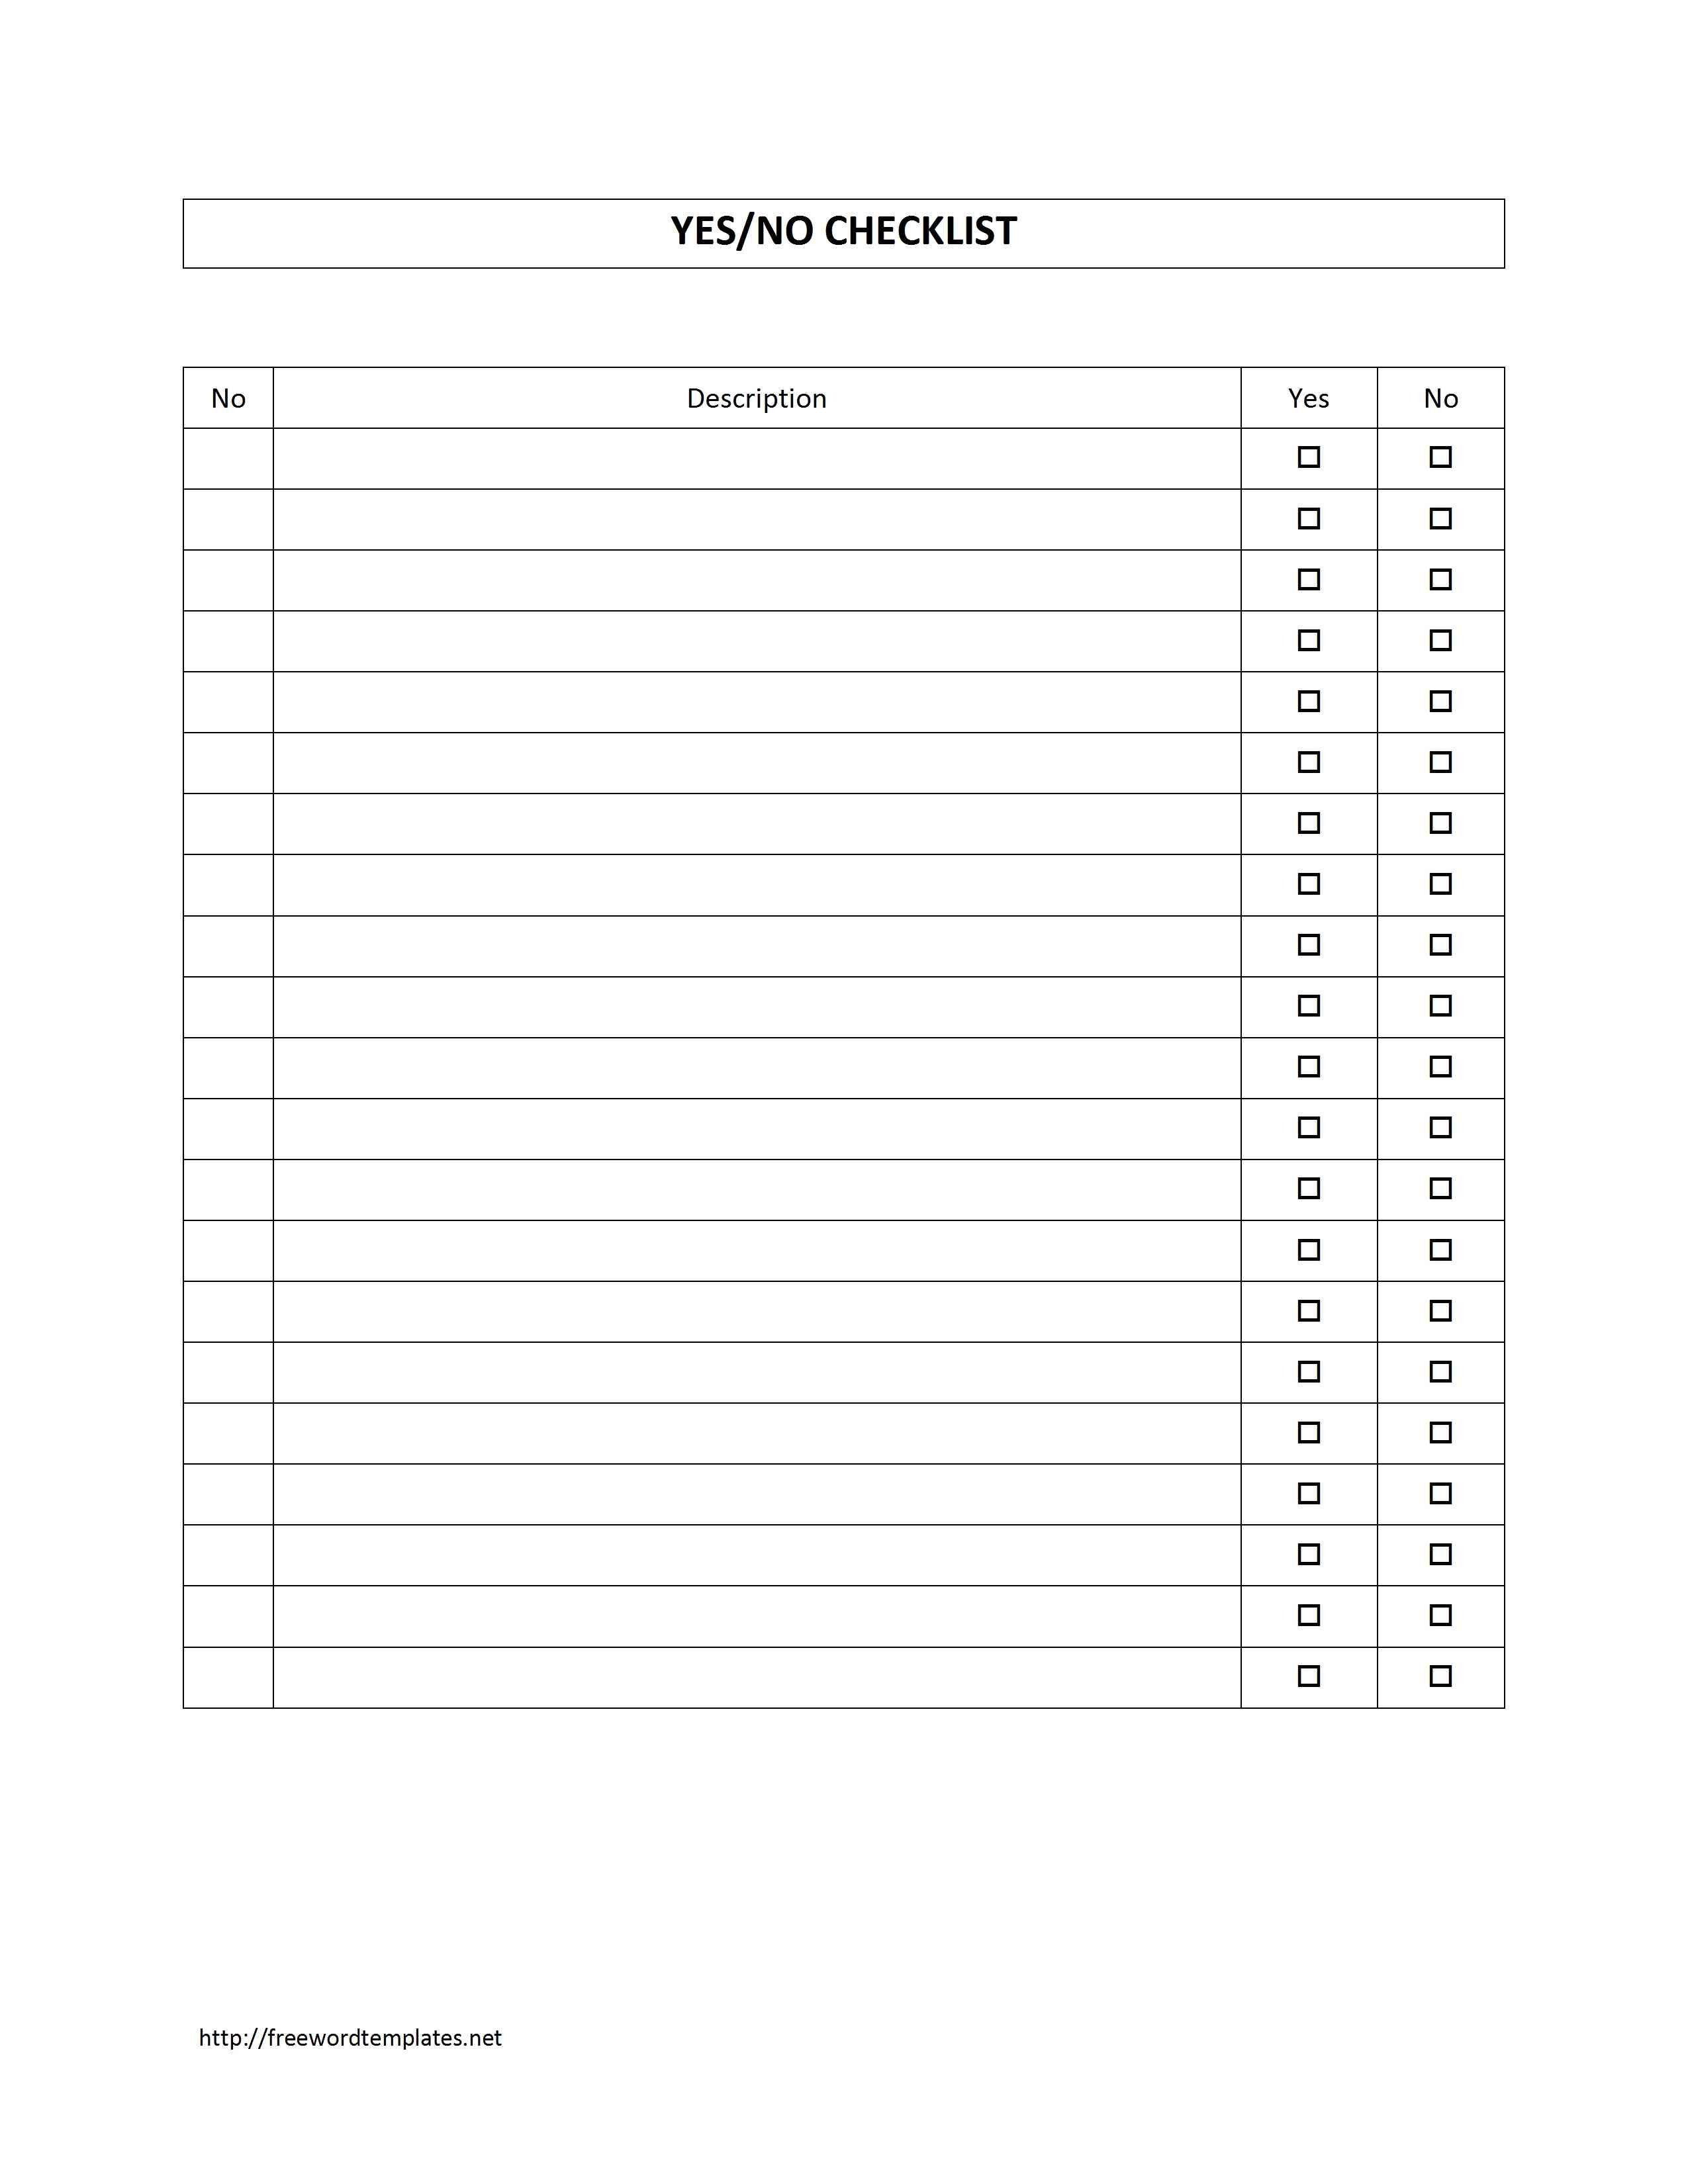 Microsoft Word Checklist Template Survey Sheet with Yes No Checklist Template